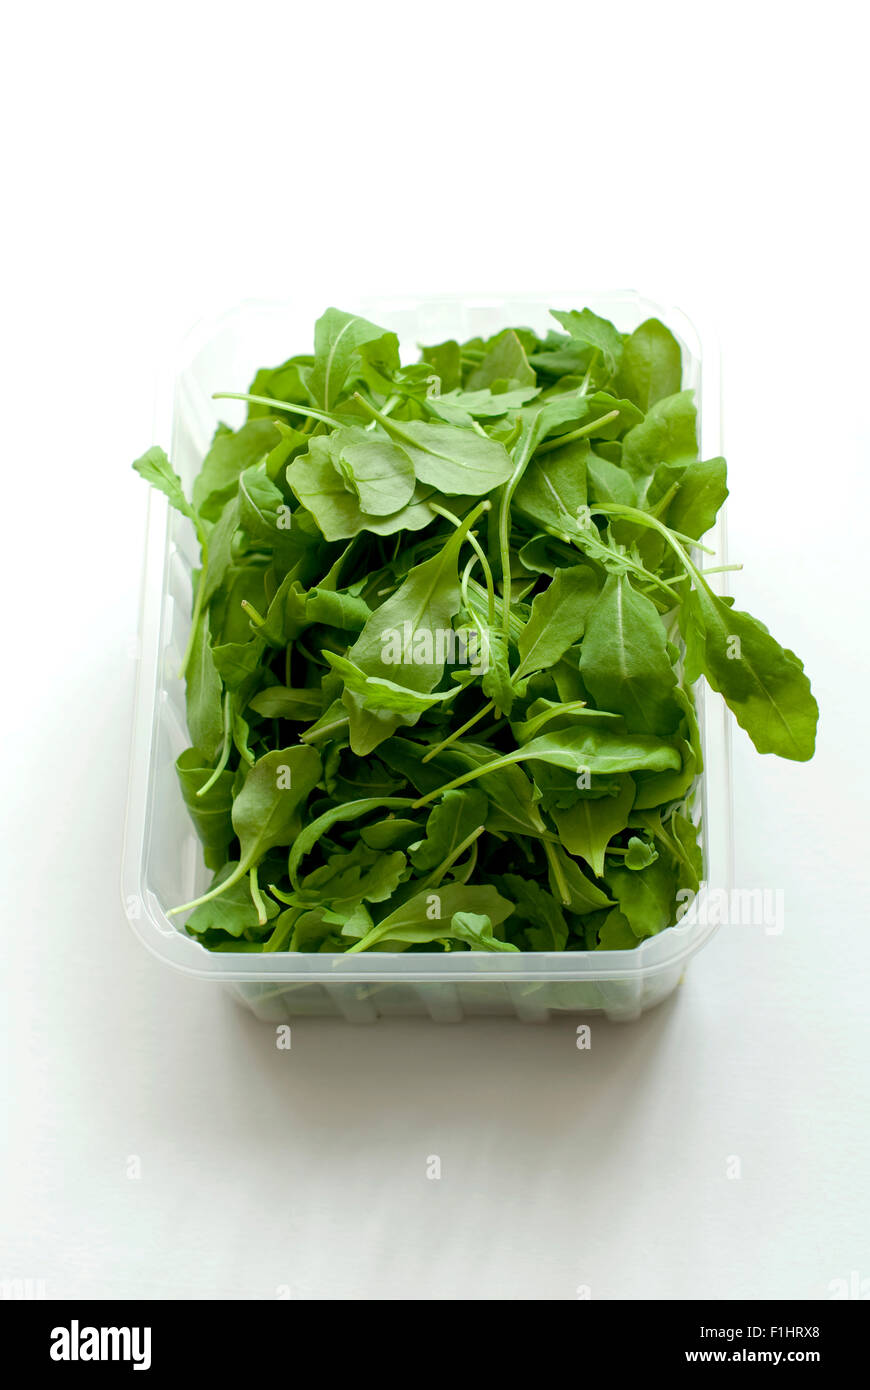 Still life food image of organic salad vegetable - Rocket in a plastic container Stock Photo